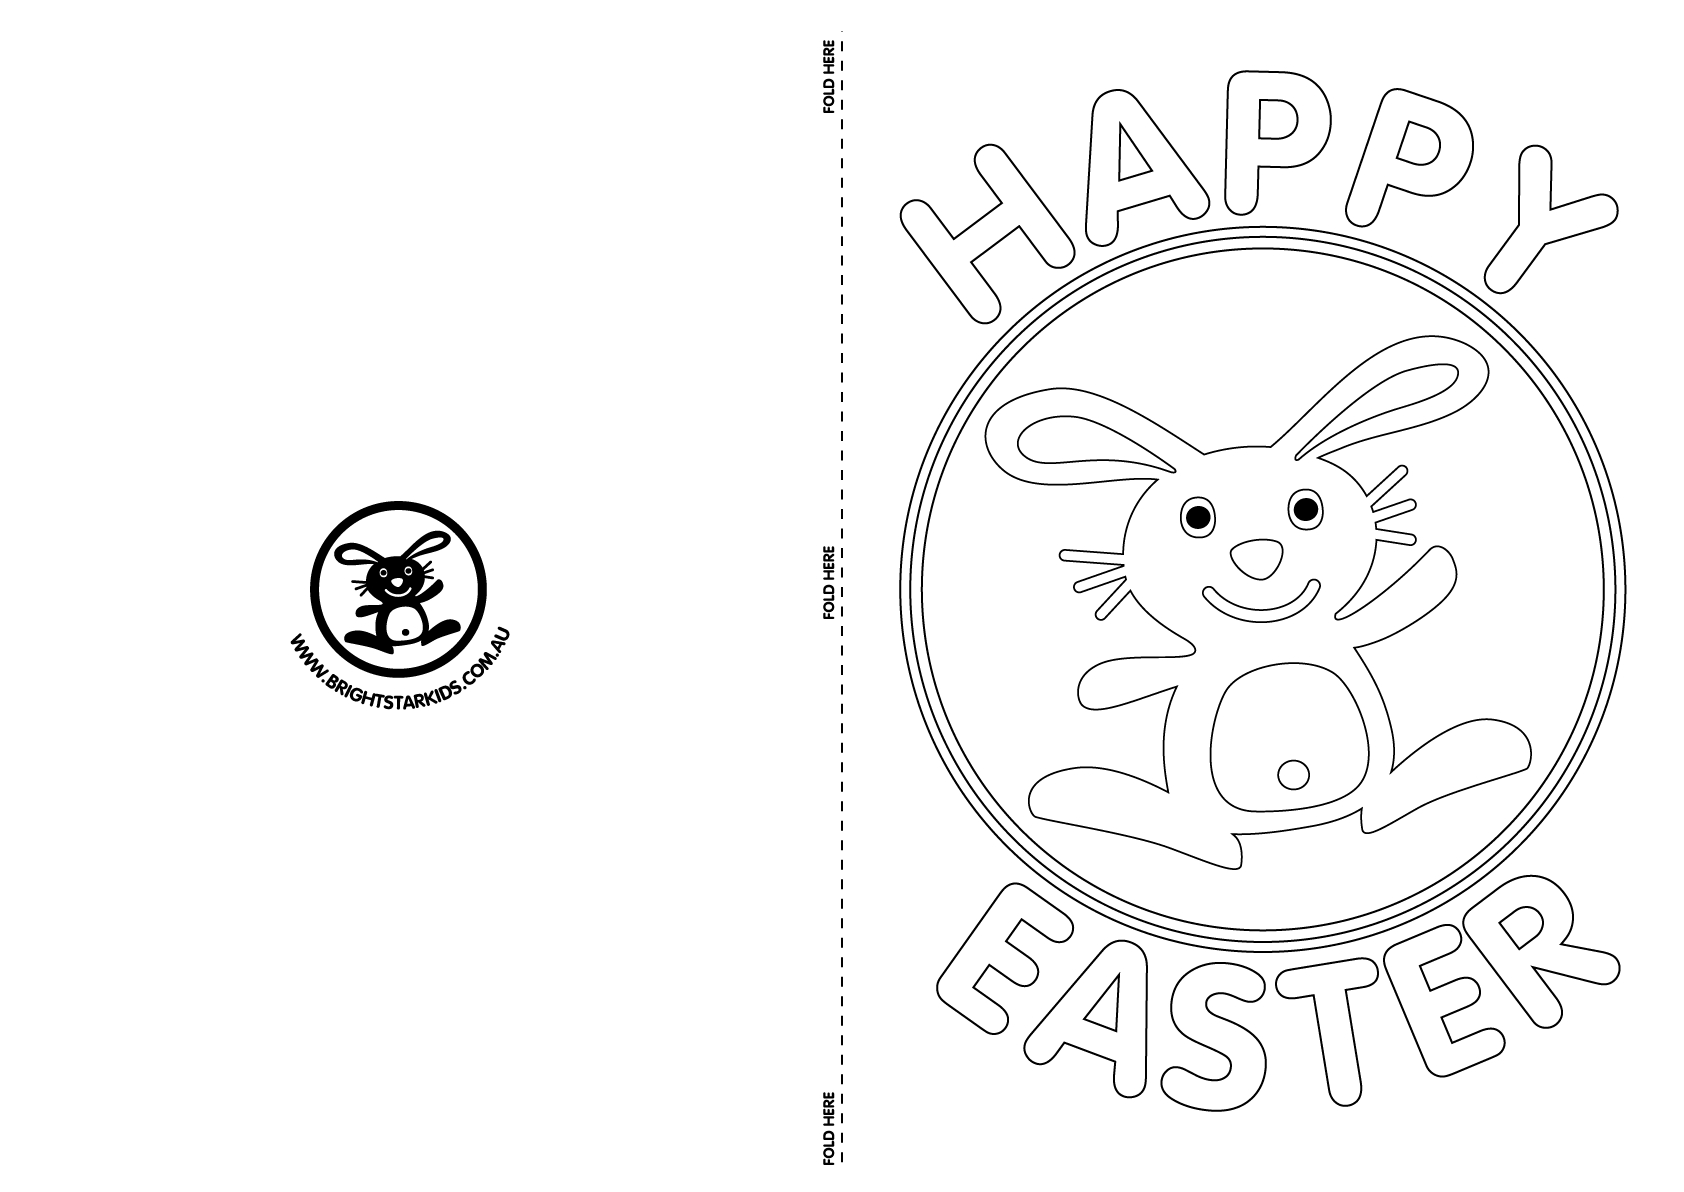 Free Printable Easter Cards Templates – Happy Easter &amp;amp; Thanksgiving 2018 - Free Printable Easter Cards To Print